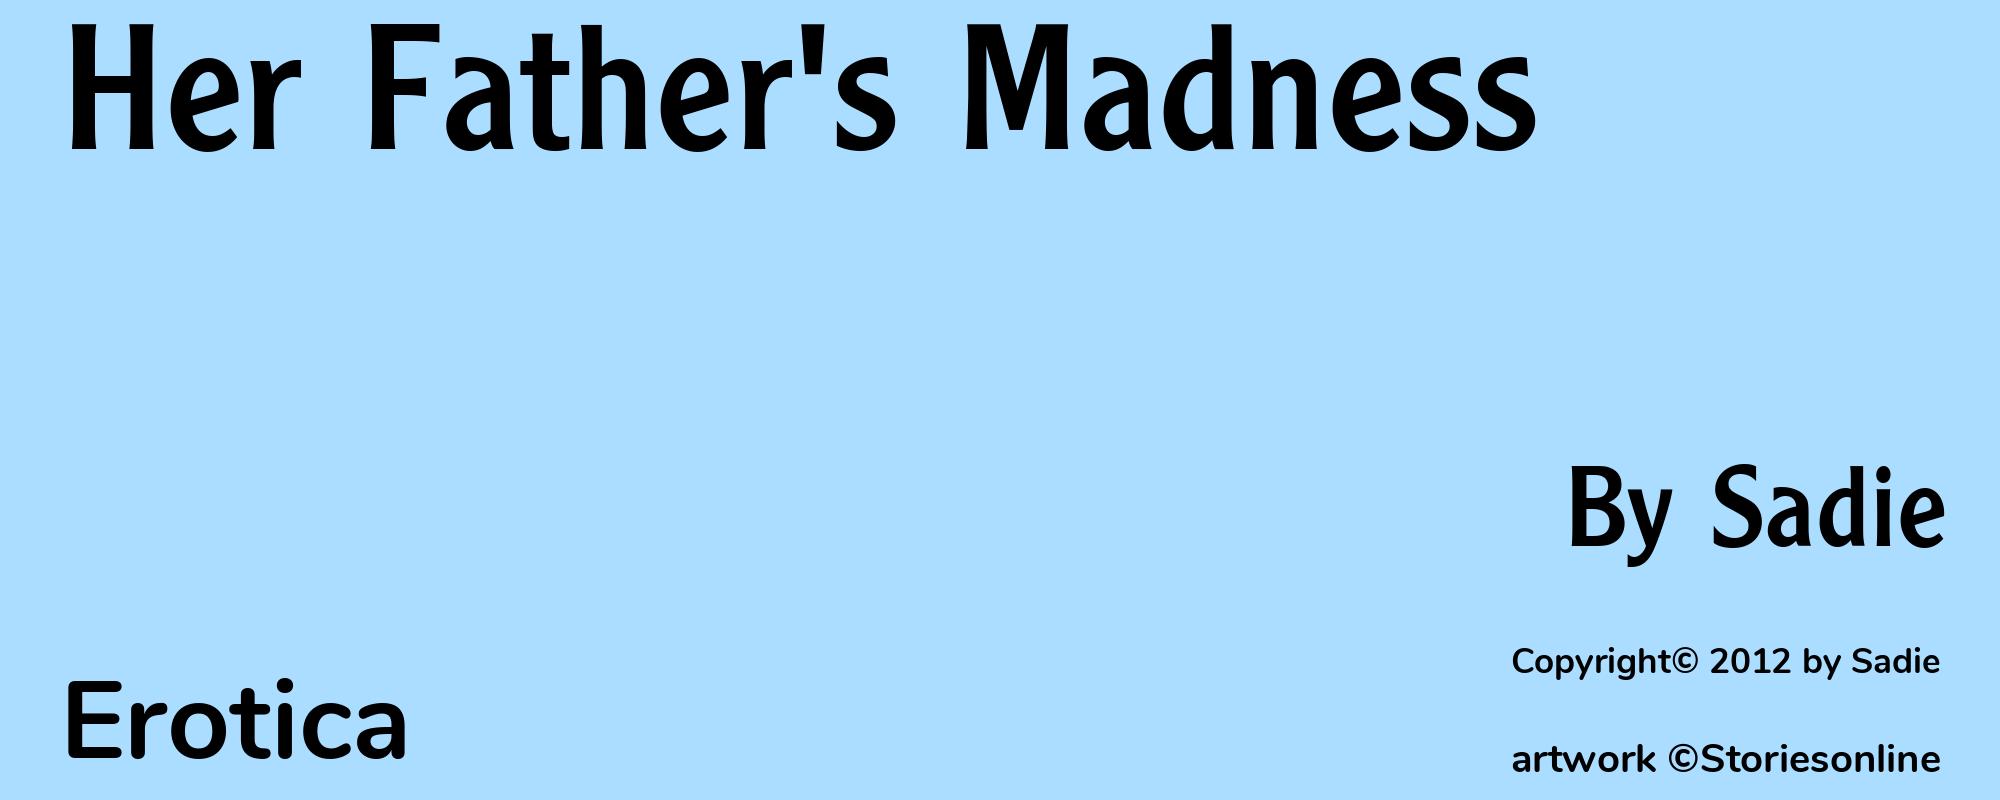 Her Father's Madness - Cover